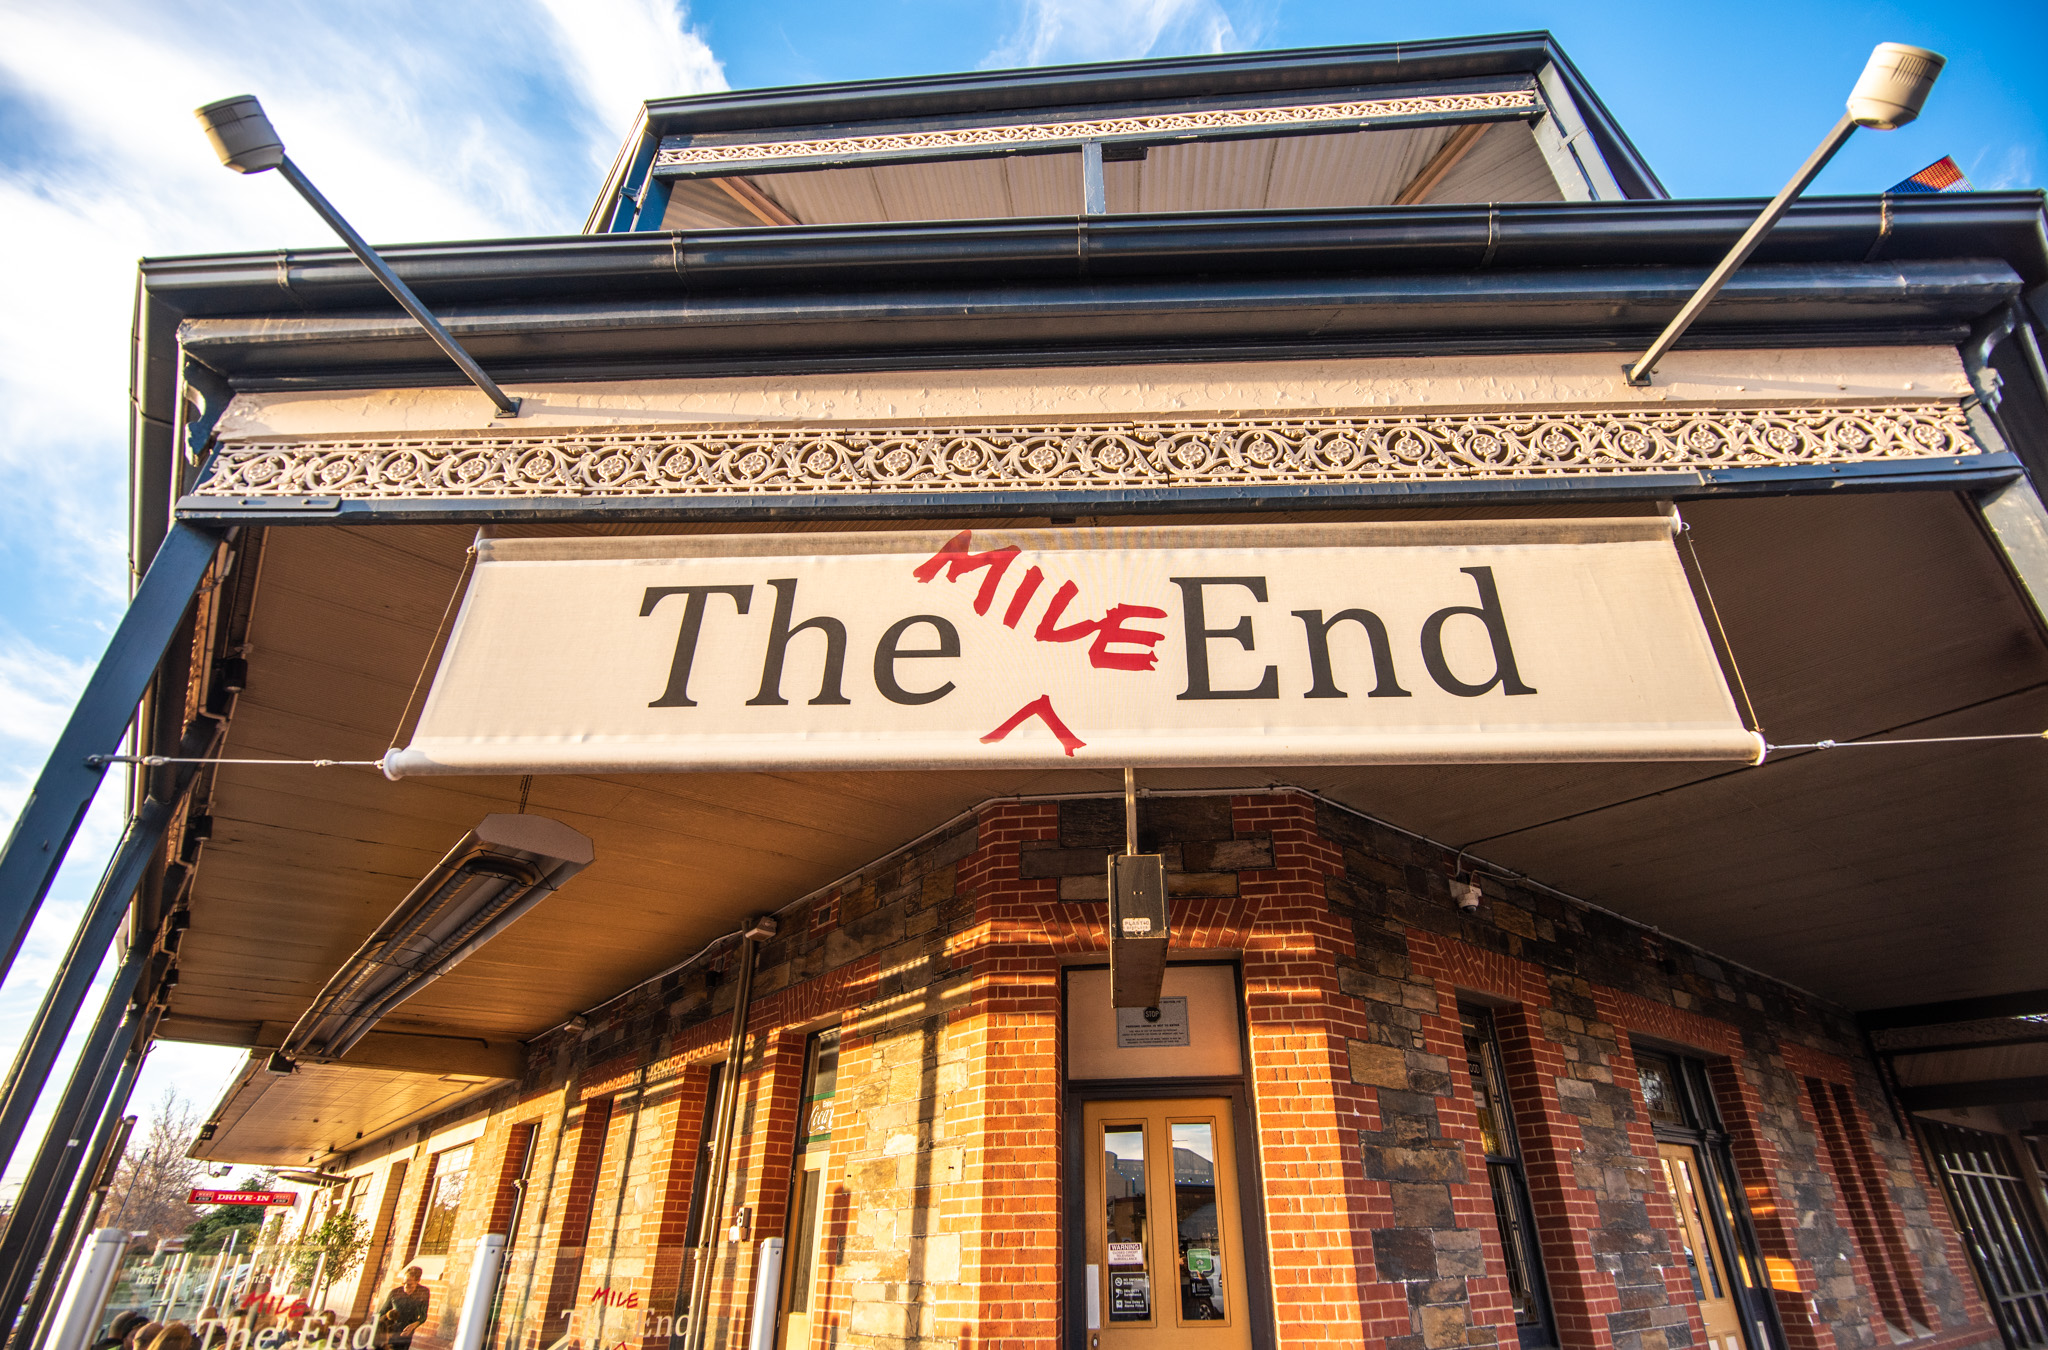 WIN an epic night at the Mile End Hotel!